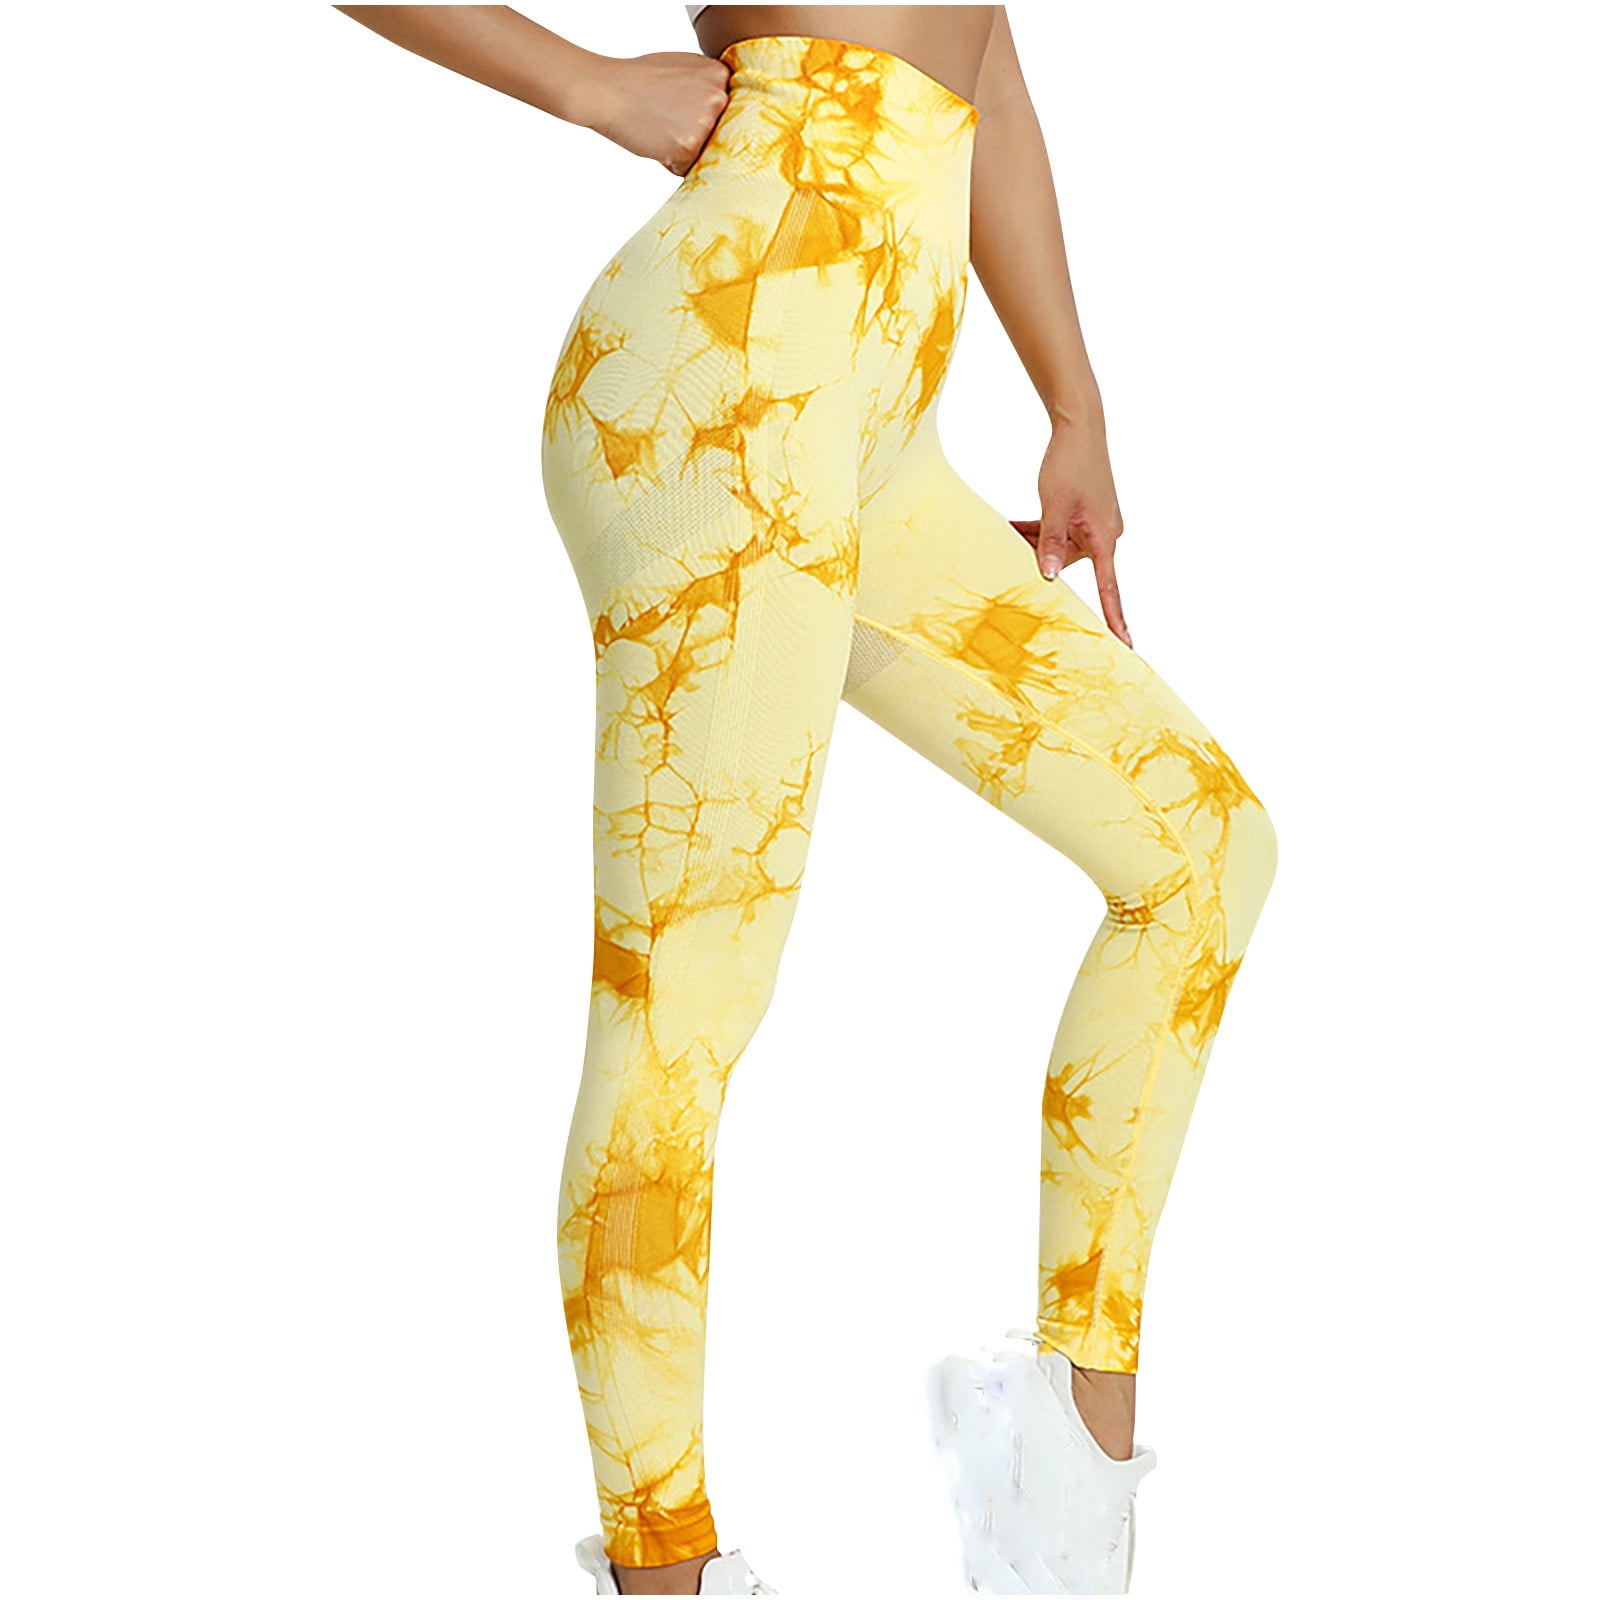 Hfyihgf Tie Dye Seamless Leggings for Women High Waist Outdoor Workout  Running Yoga Pants Scrunch Butt Lifting Stretch Tights Fitness  Pant(Yellow,S)